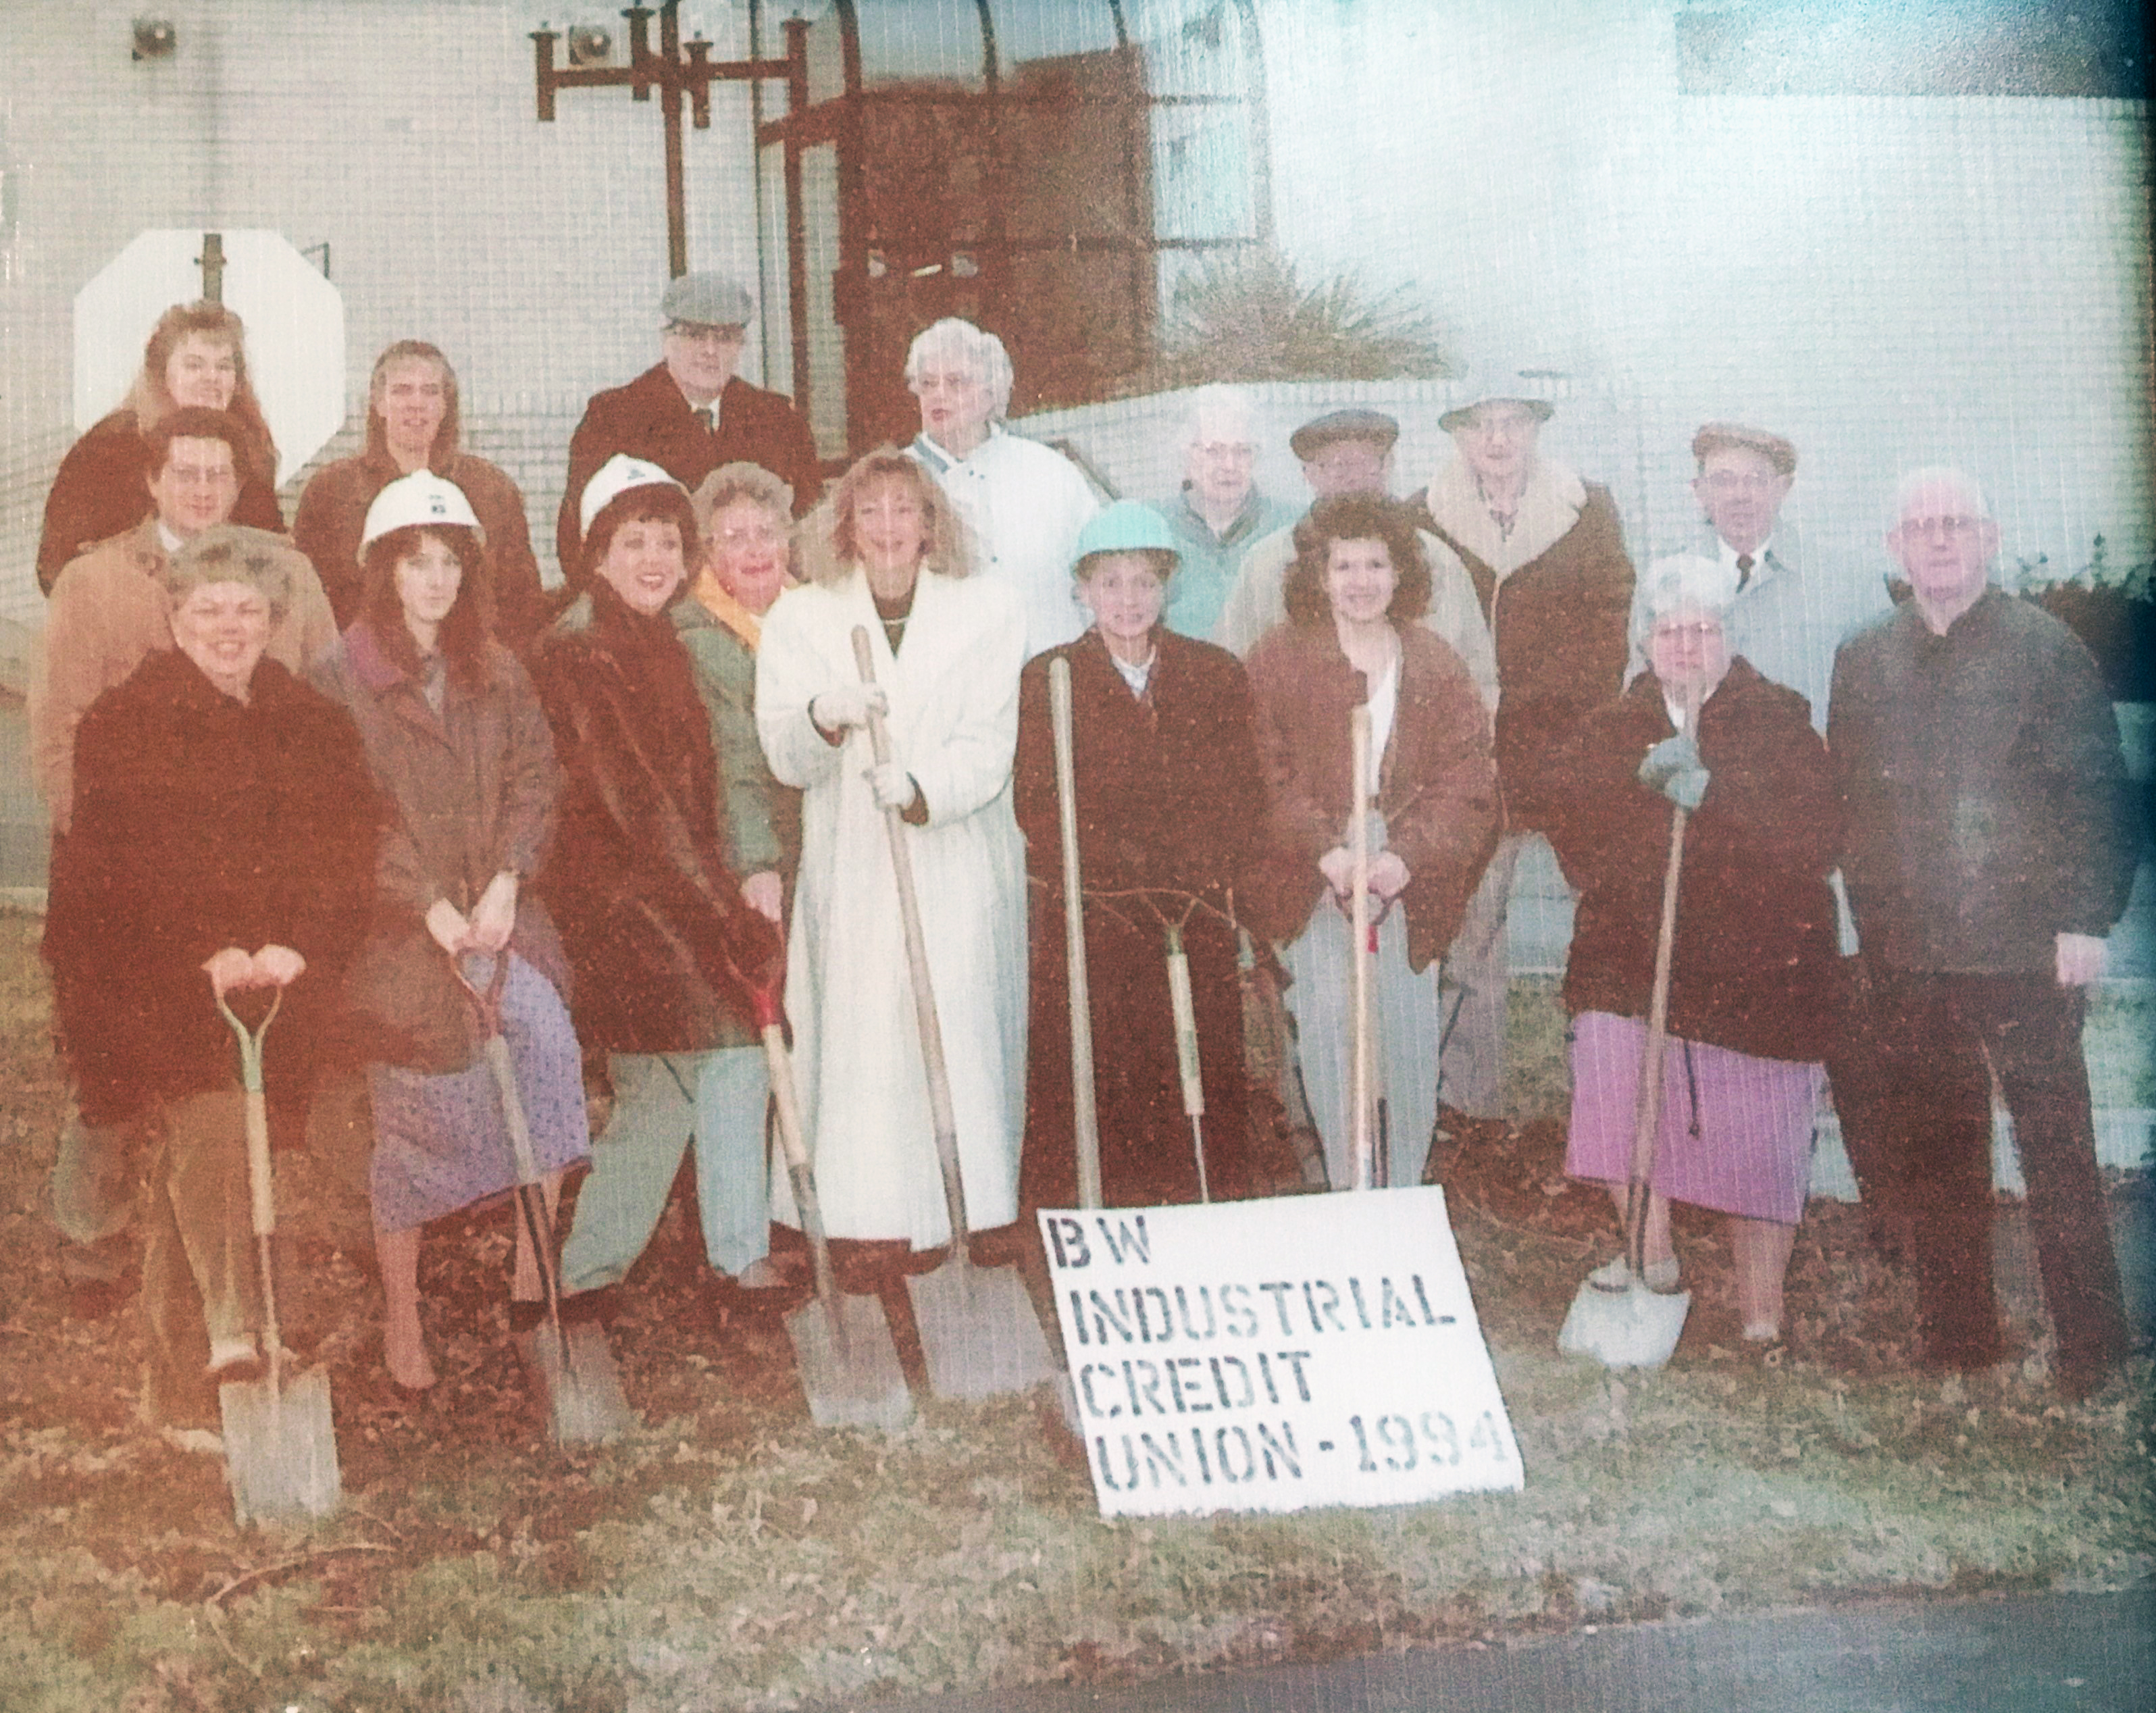 Image: Old photo of branch expansion groundbreaking at BW Credit Union in 1994